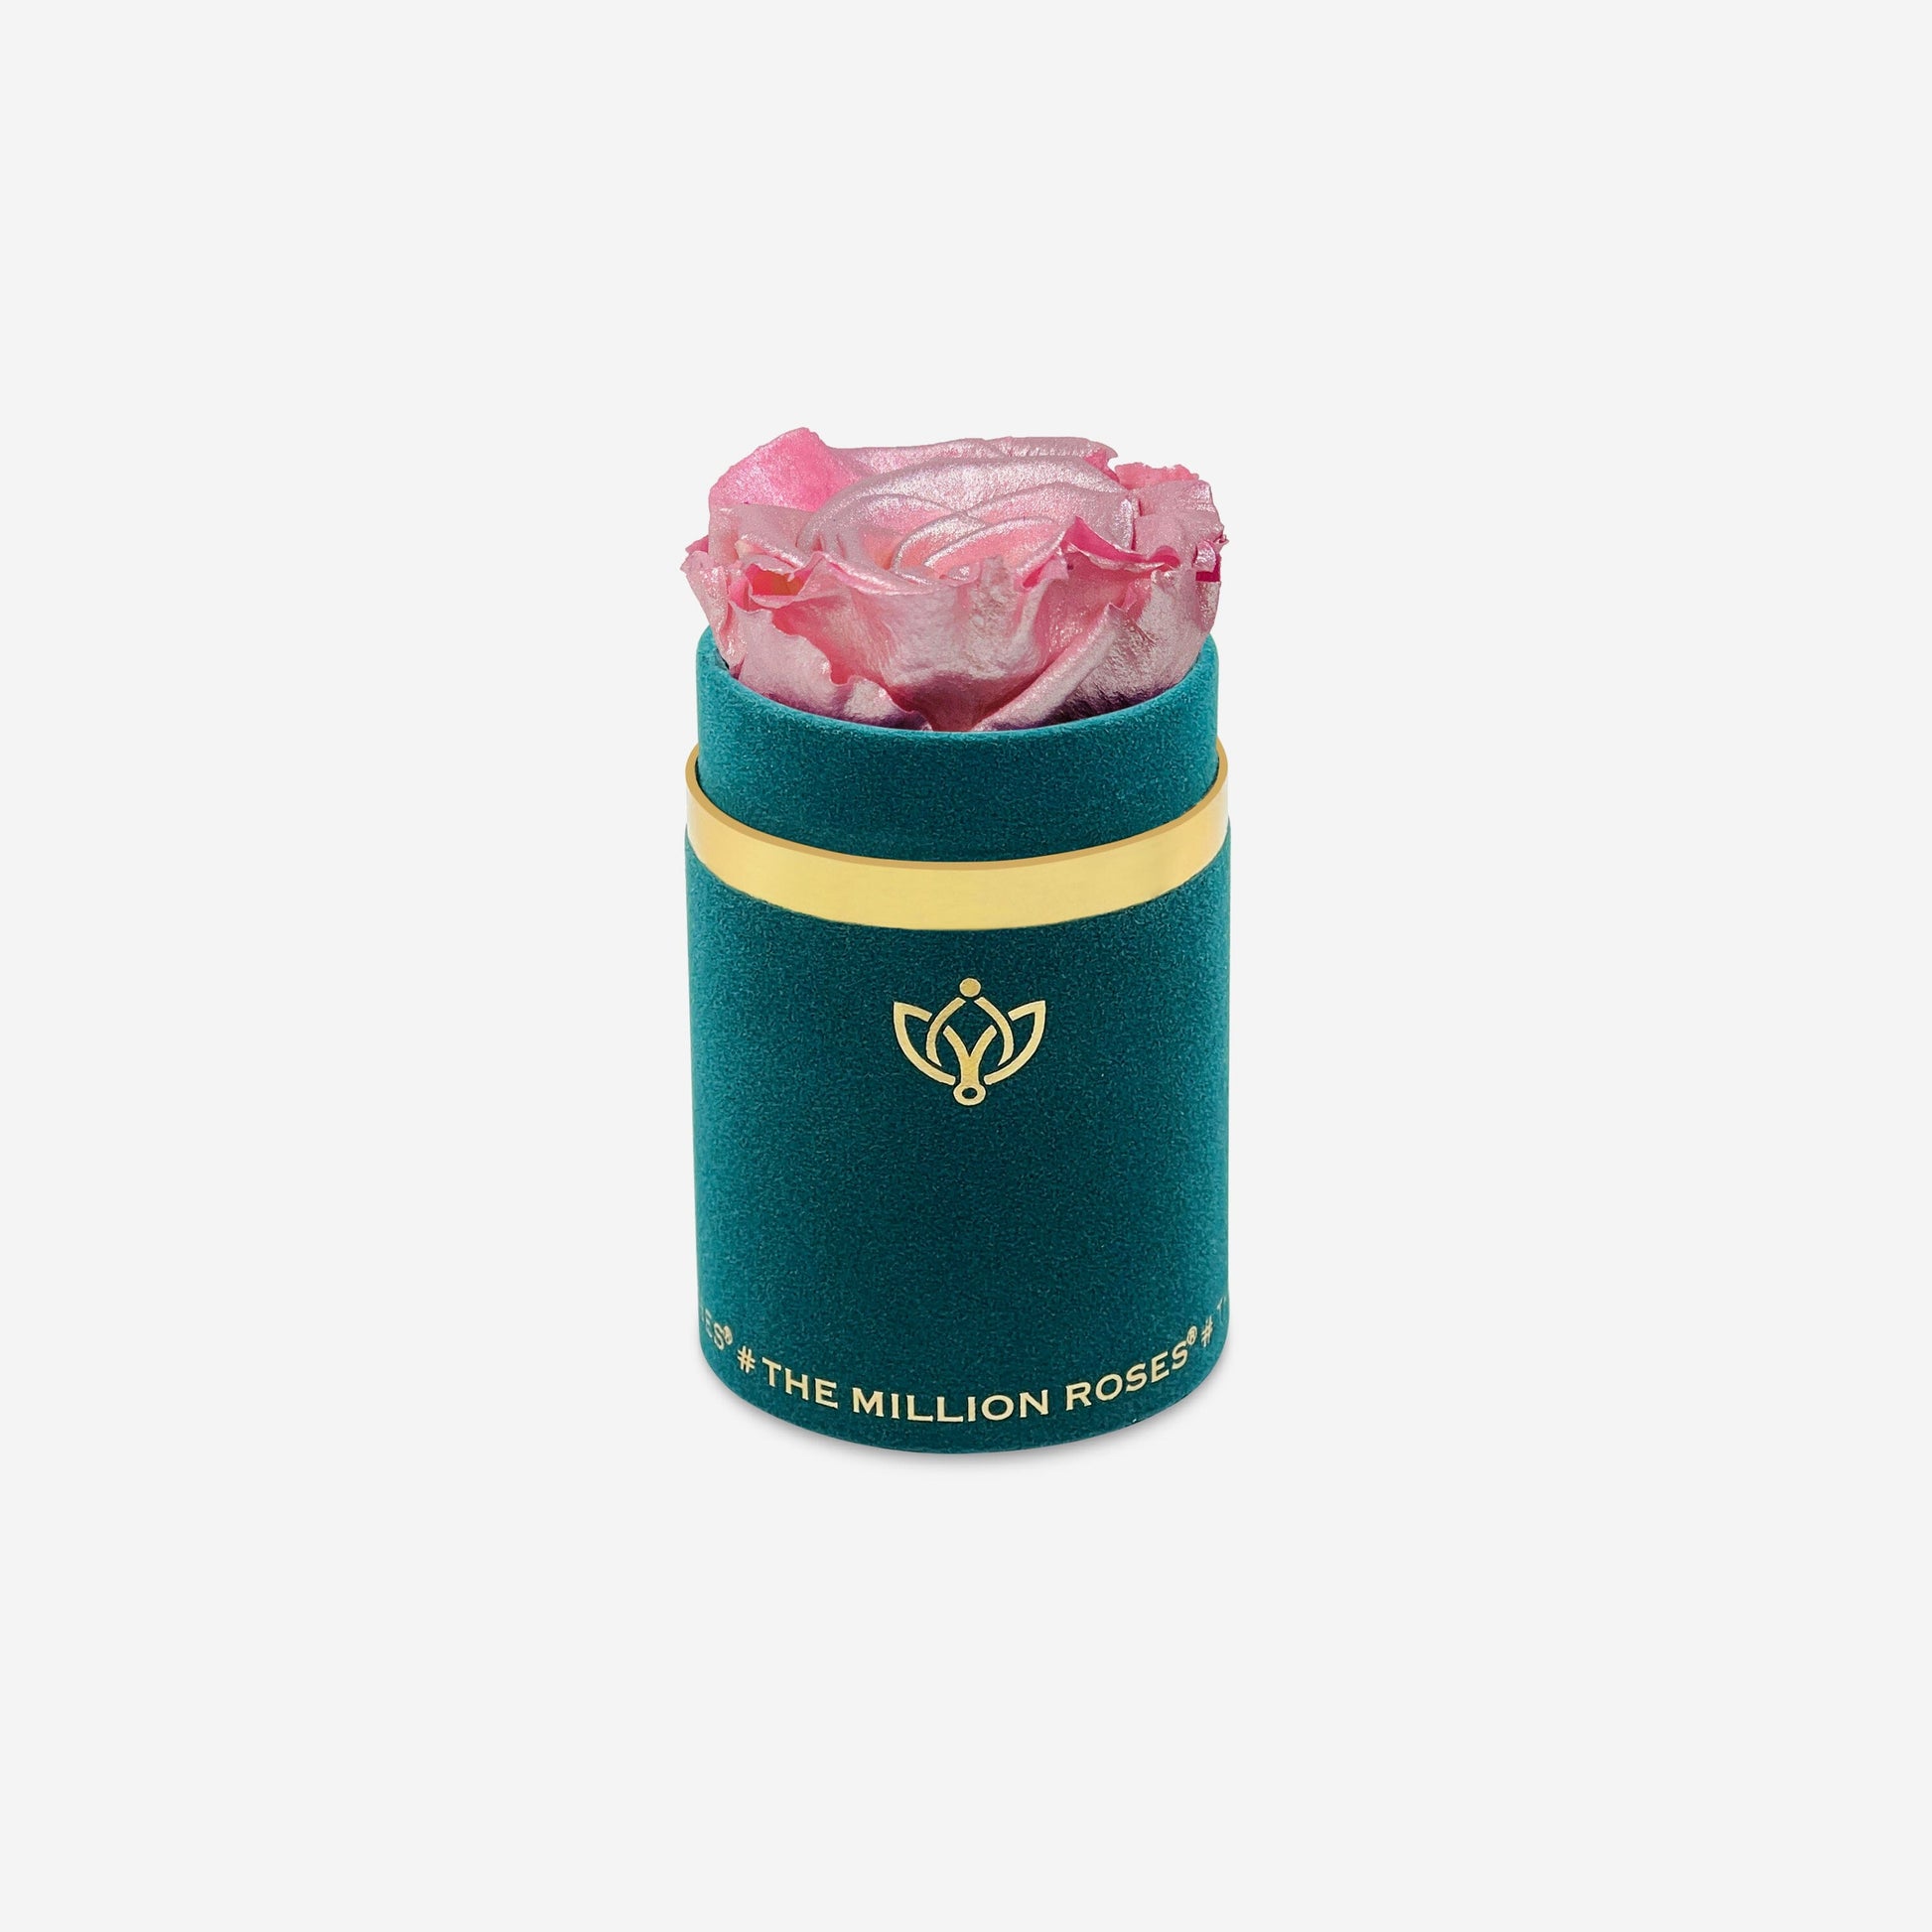 Single Dark Green Suede Box | Pink Gold Rose - The Million Roses